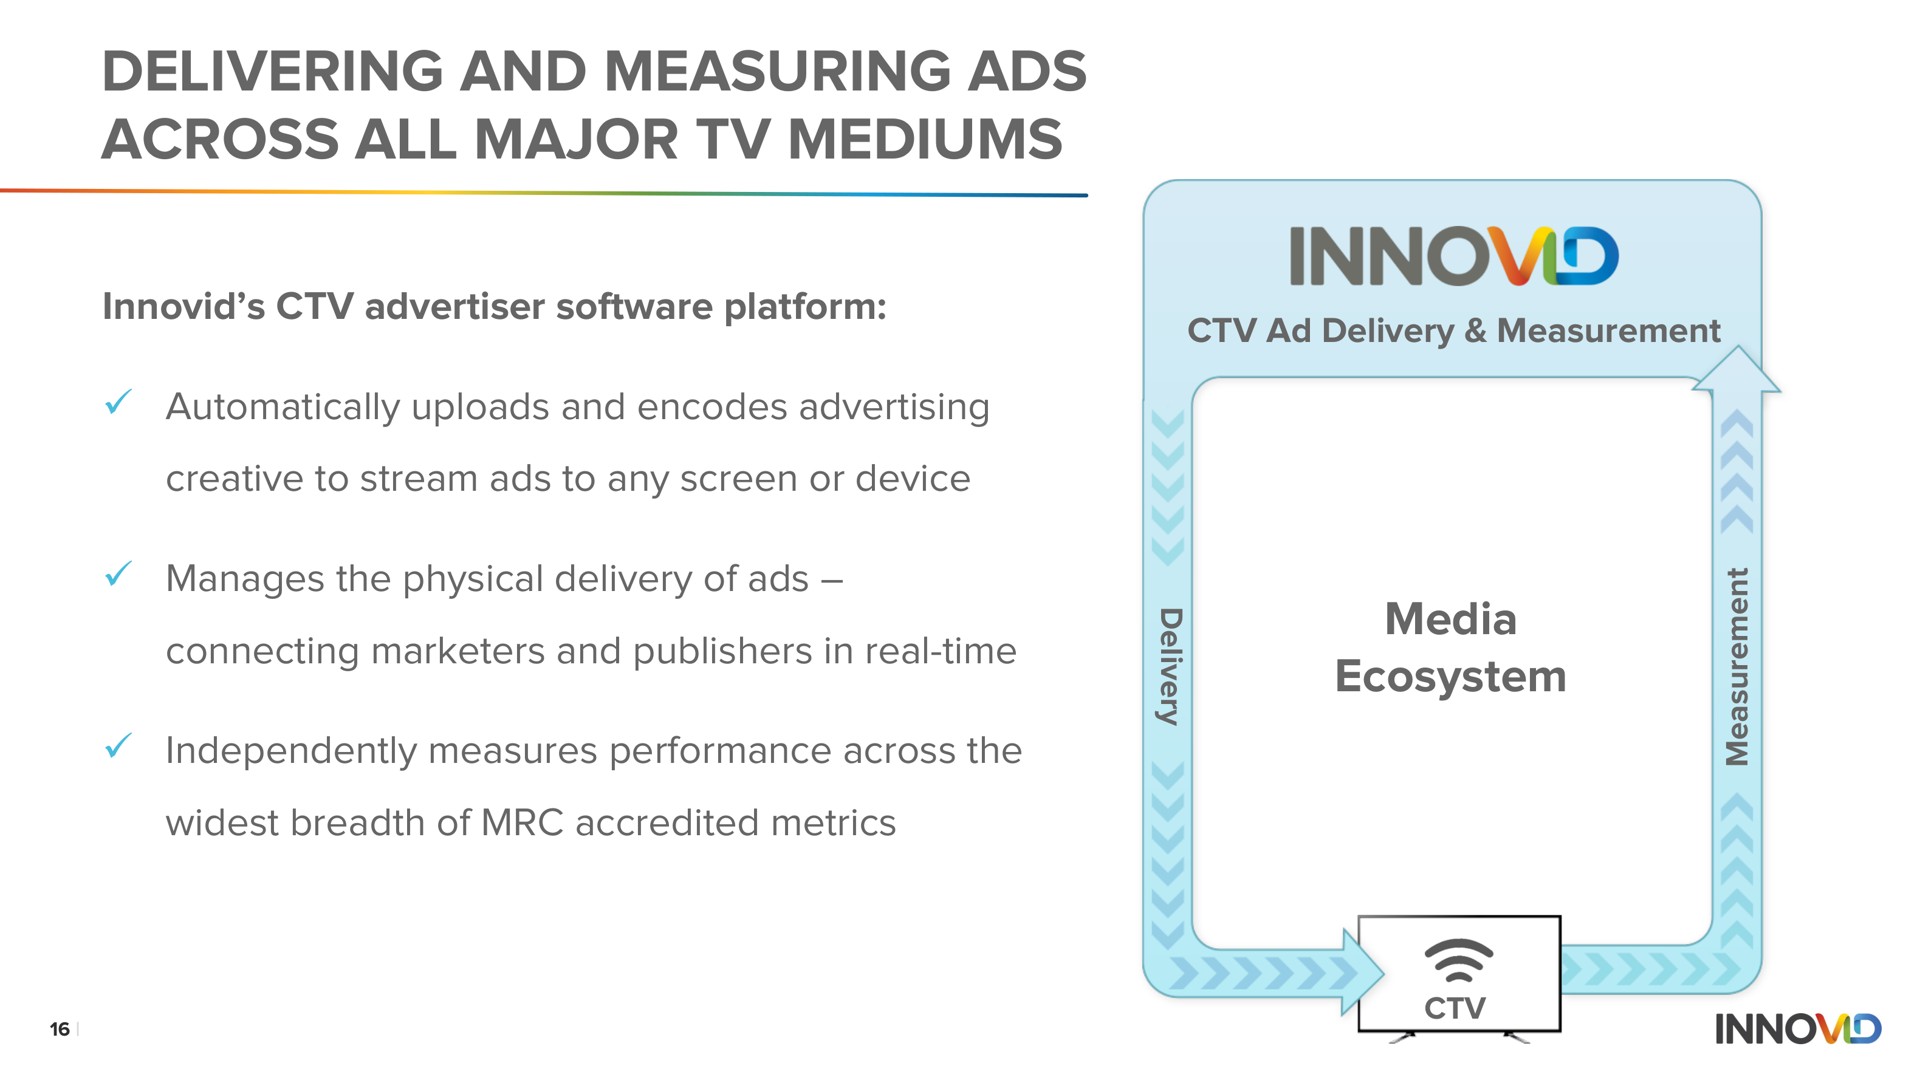 delivering and measuring ads across all major mediums | Innovid